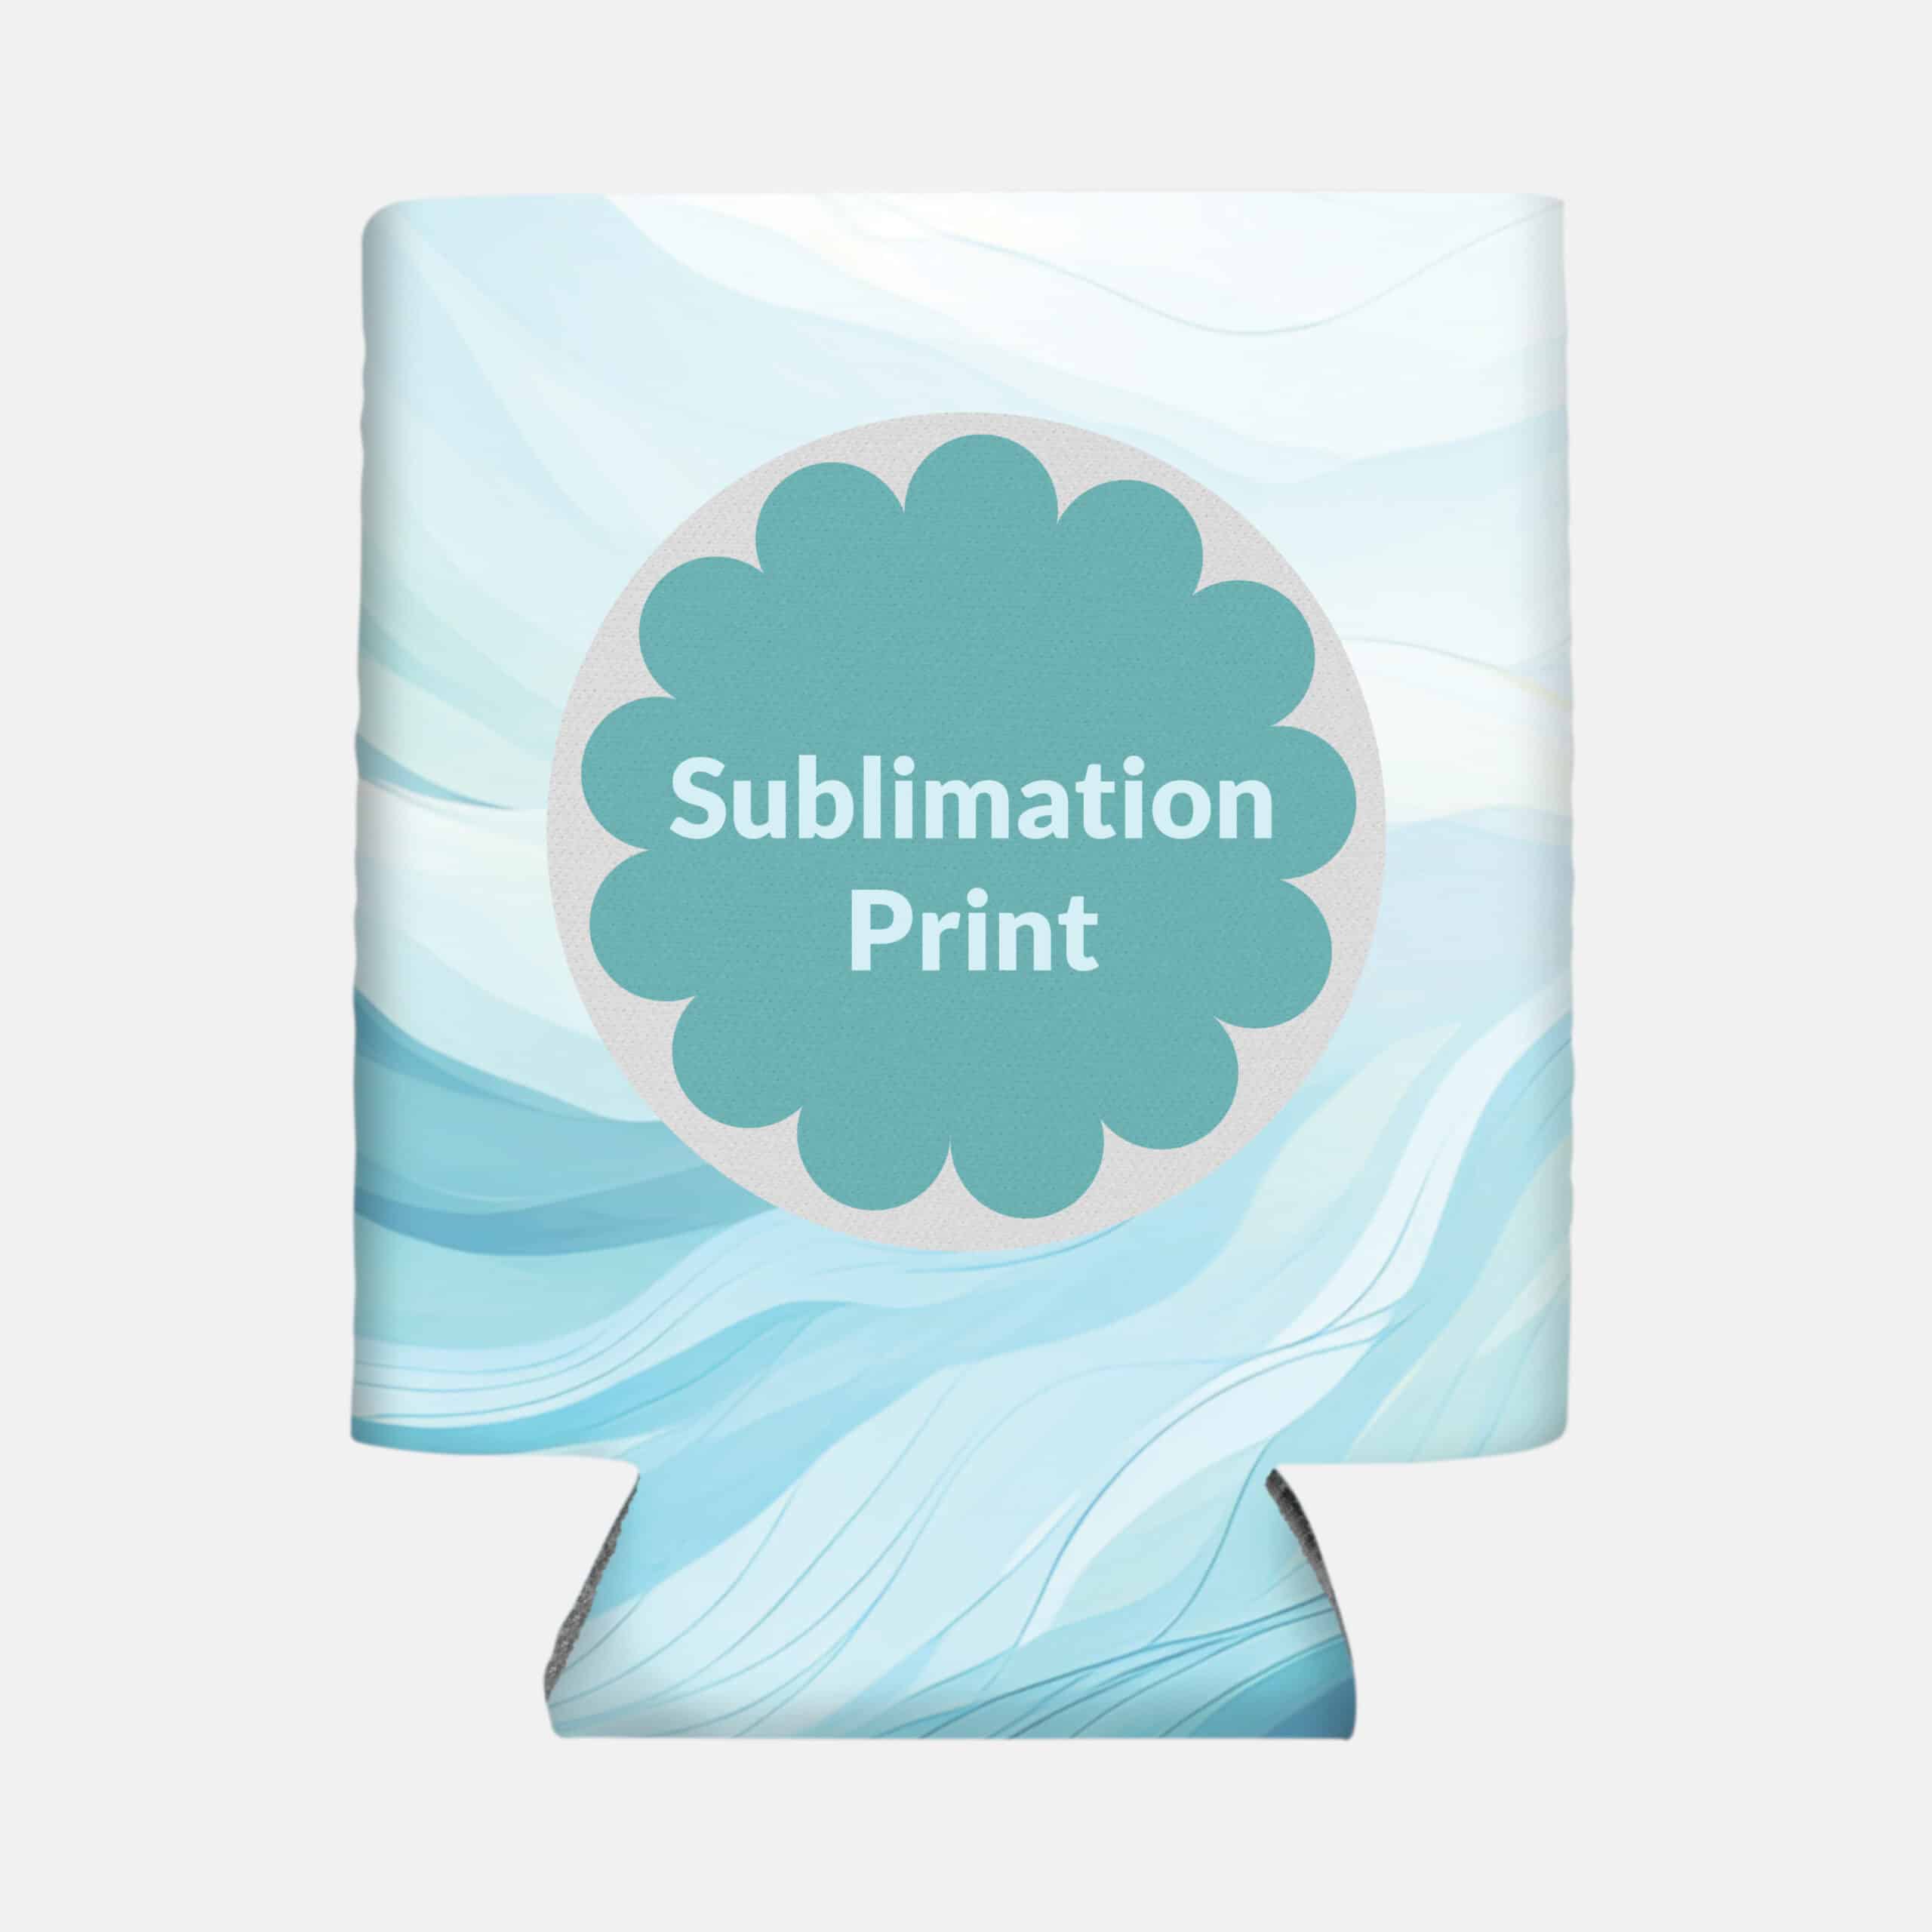 The Branding Business offers a wide range of decoration methods including Dye Sublimation.